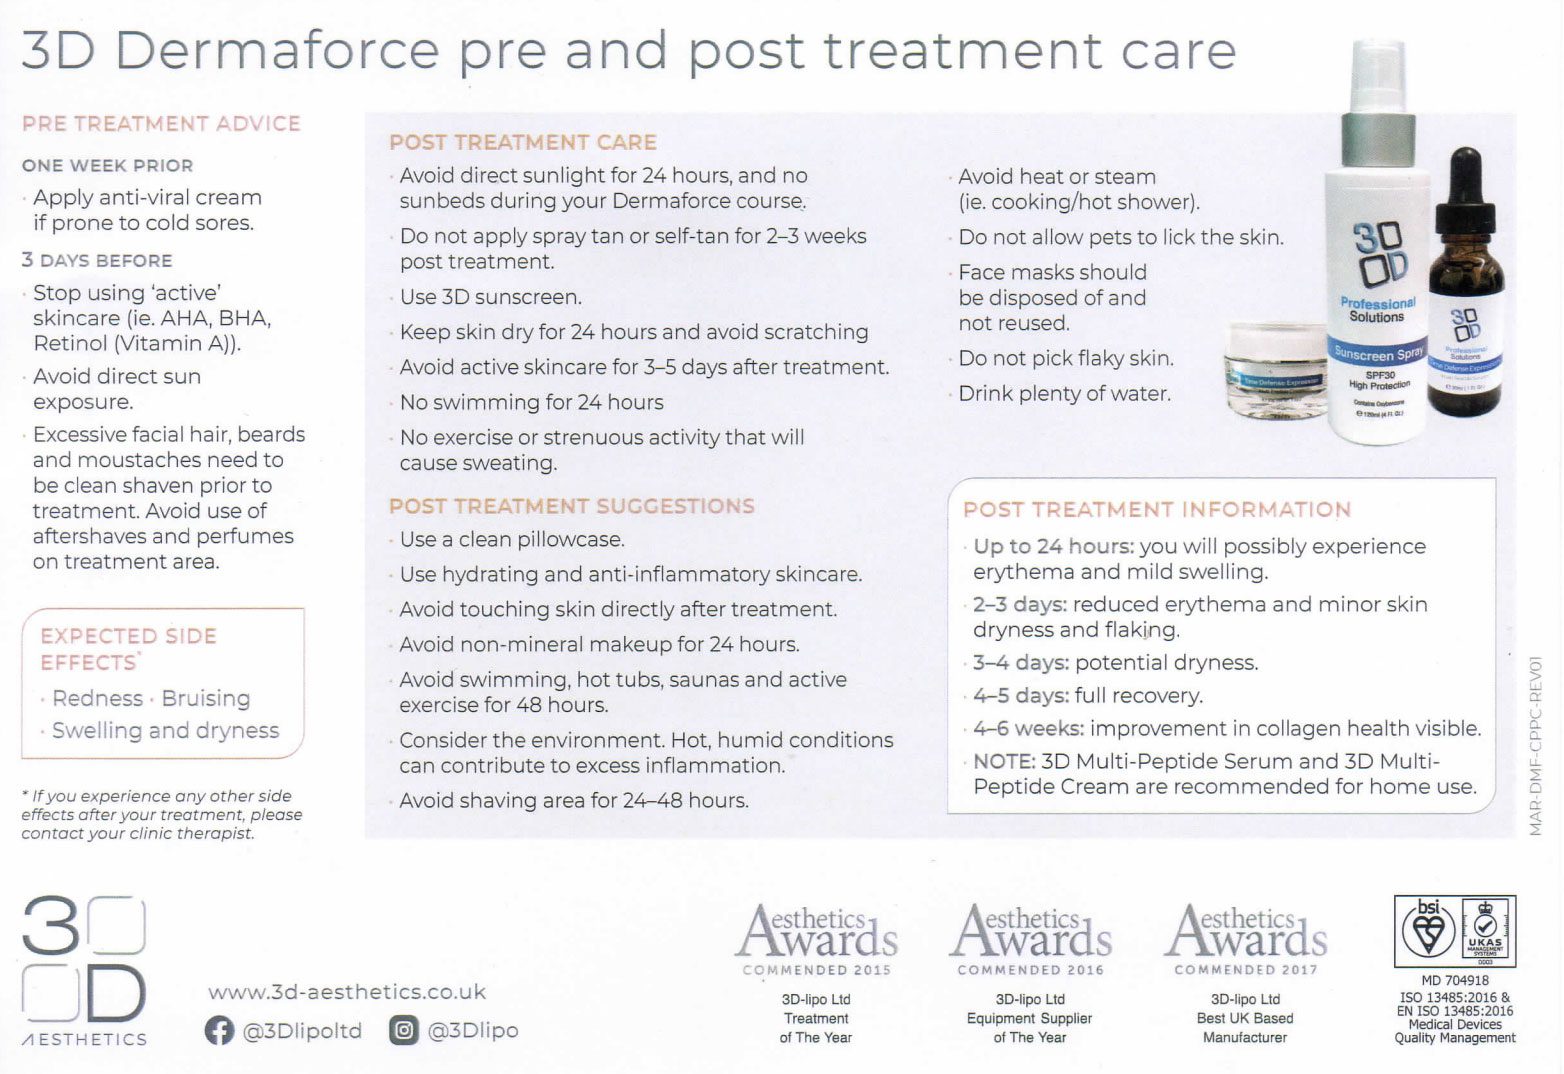 3D Dermaforce pre and post treatment care instructions.